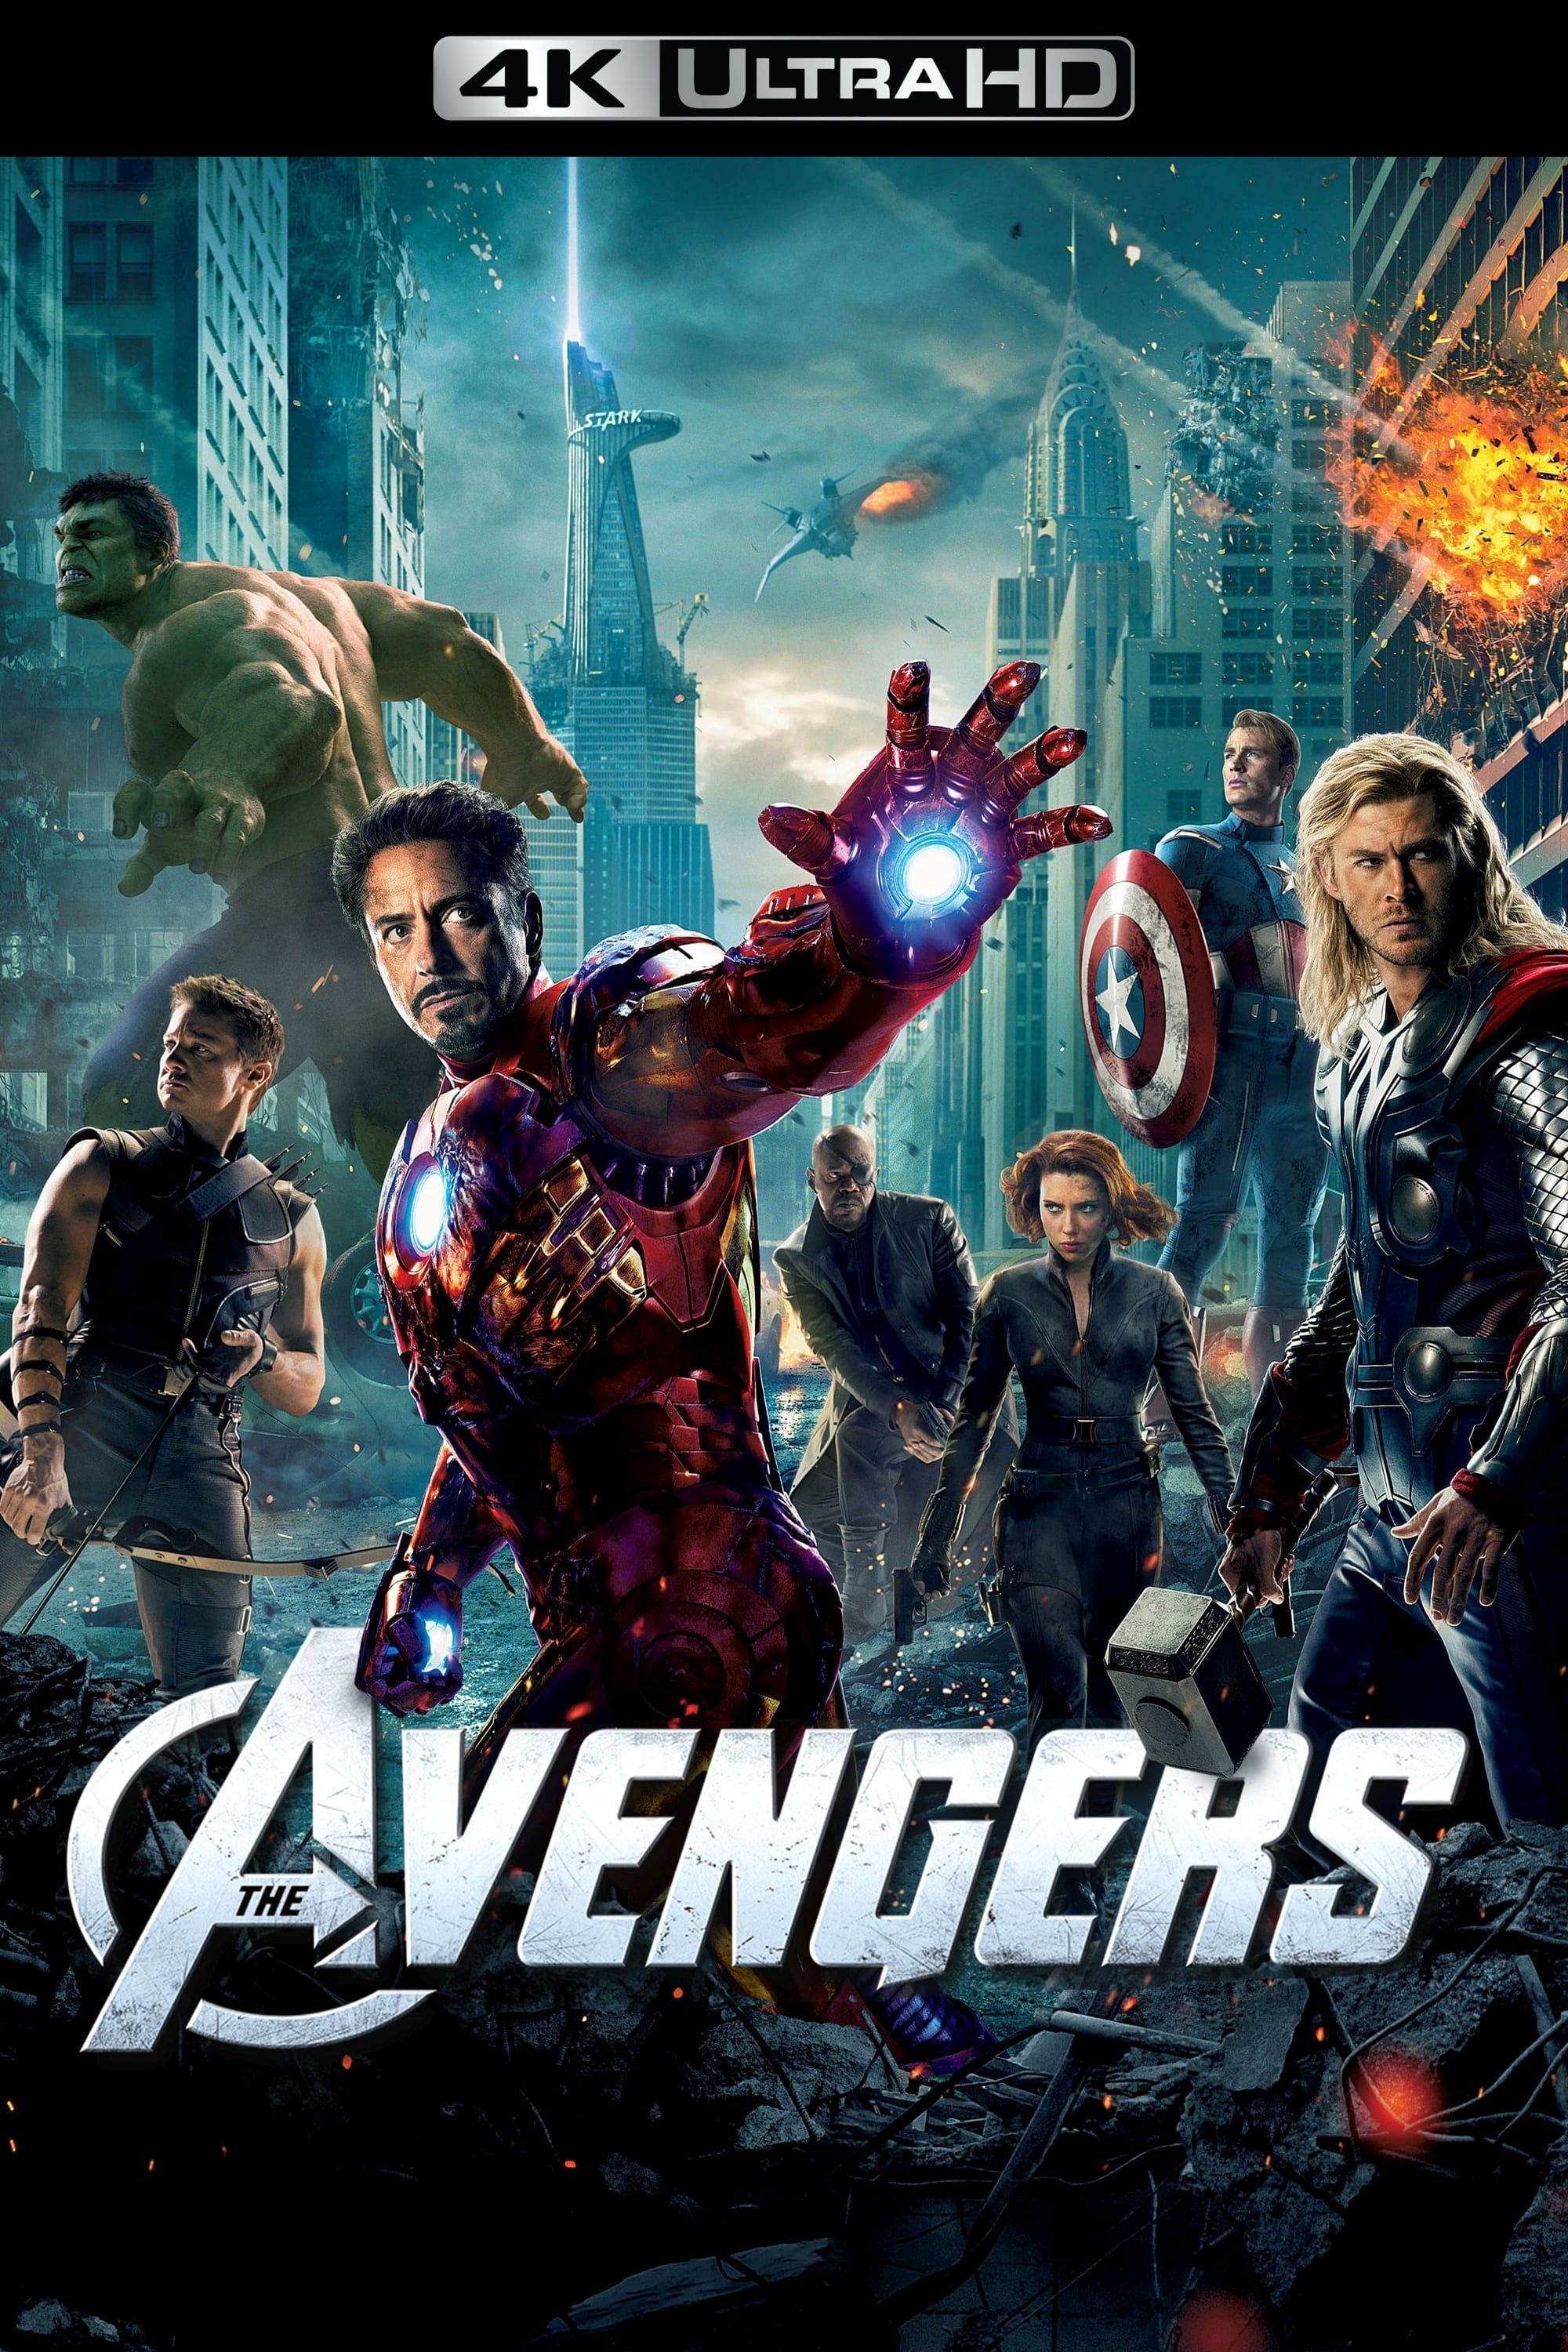 the avengers movie review